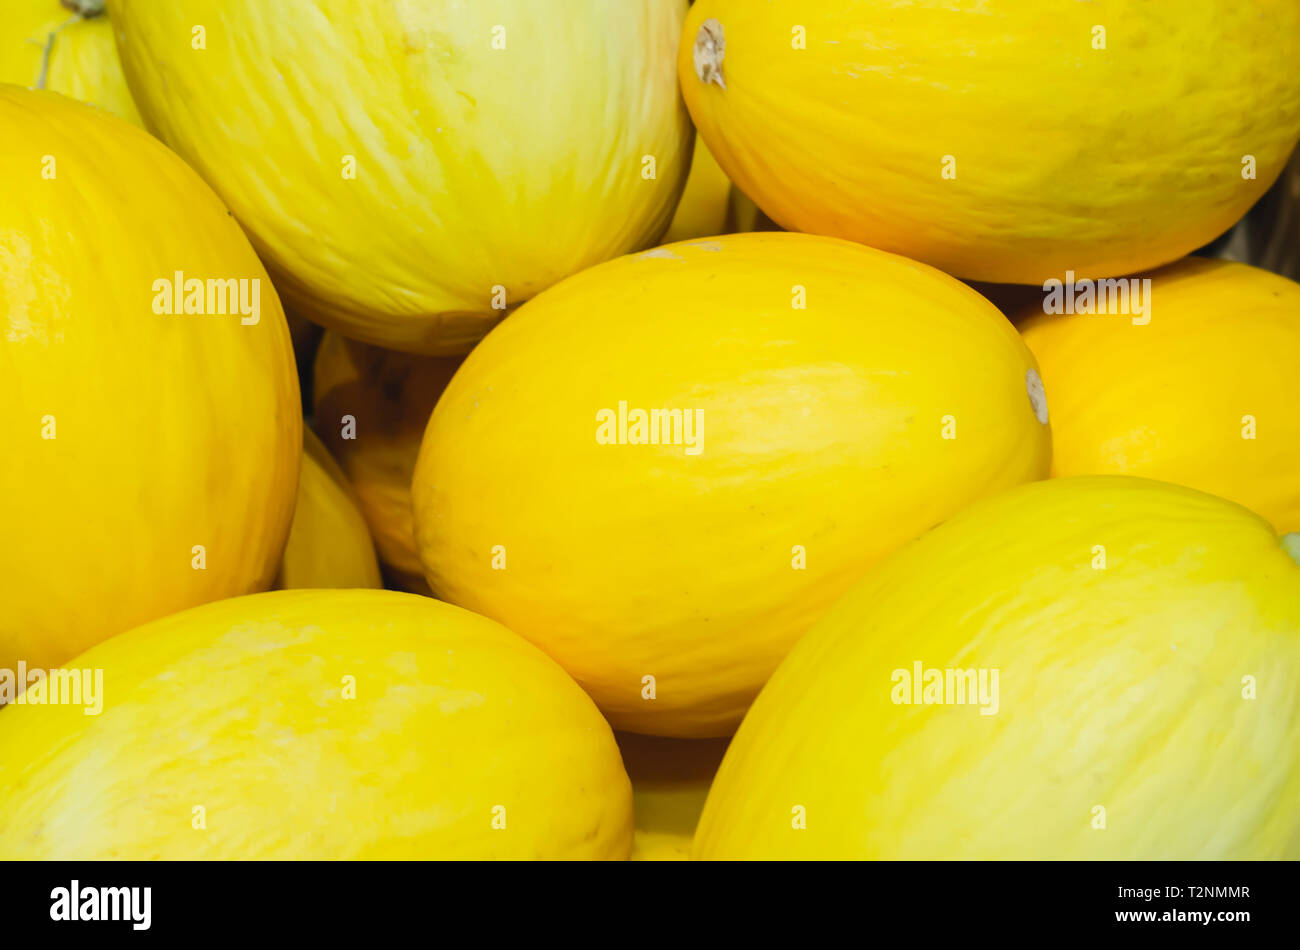 yellow melons stacked for retail sale in a market Stock Photo